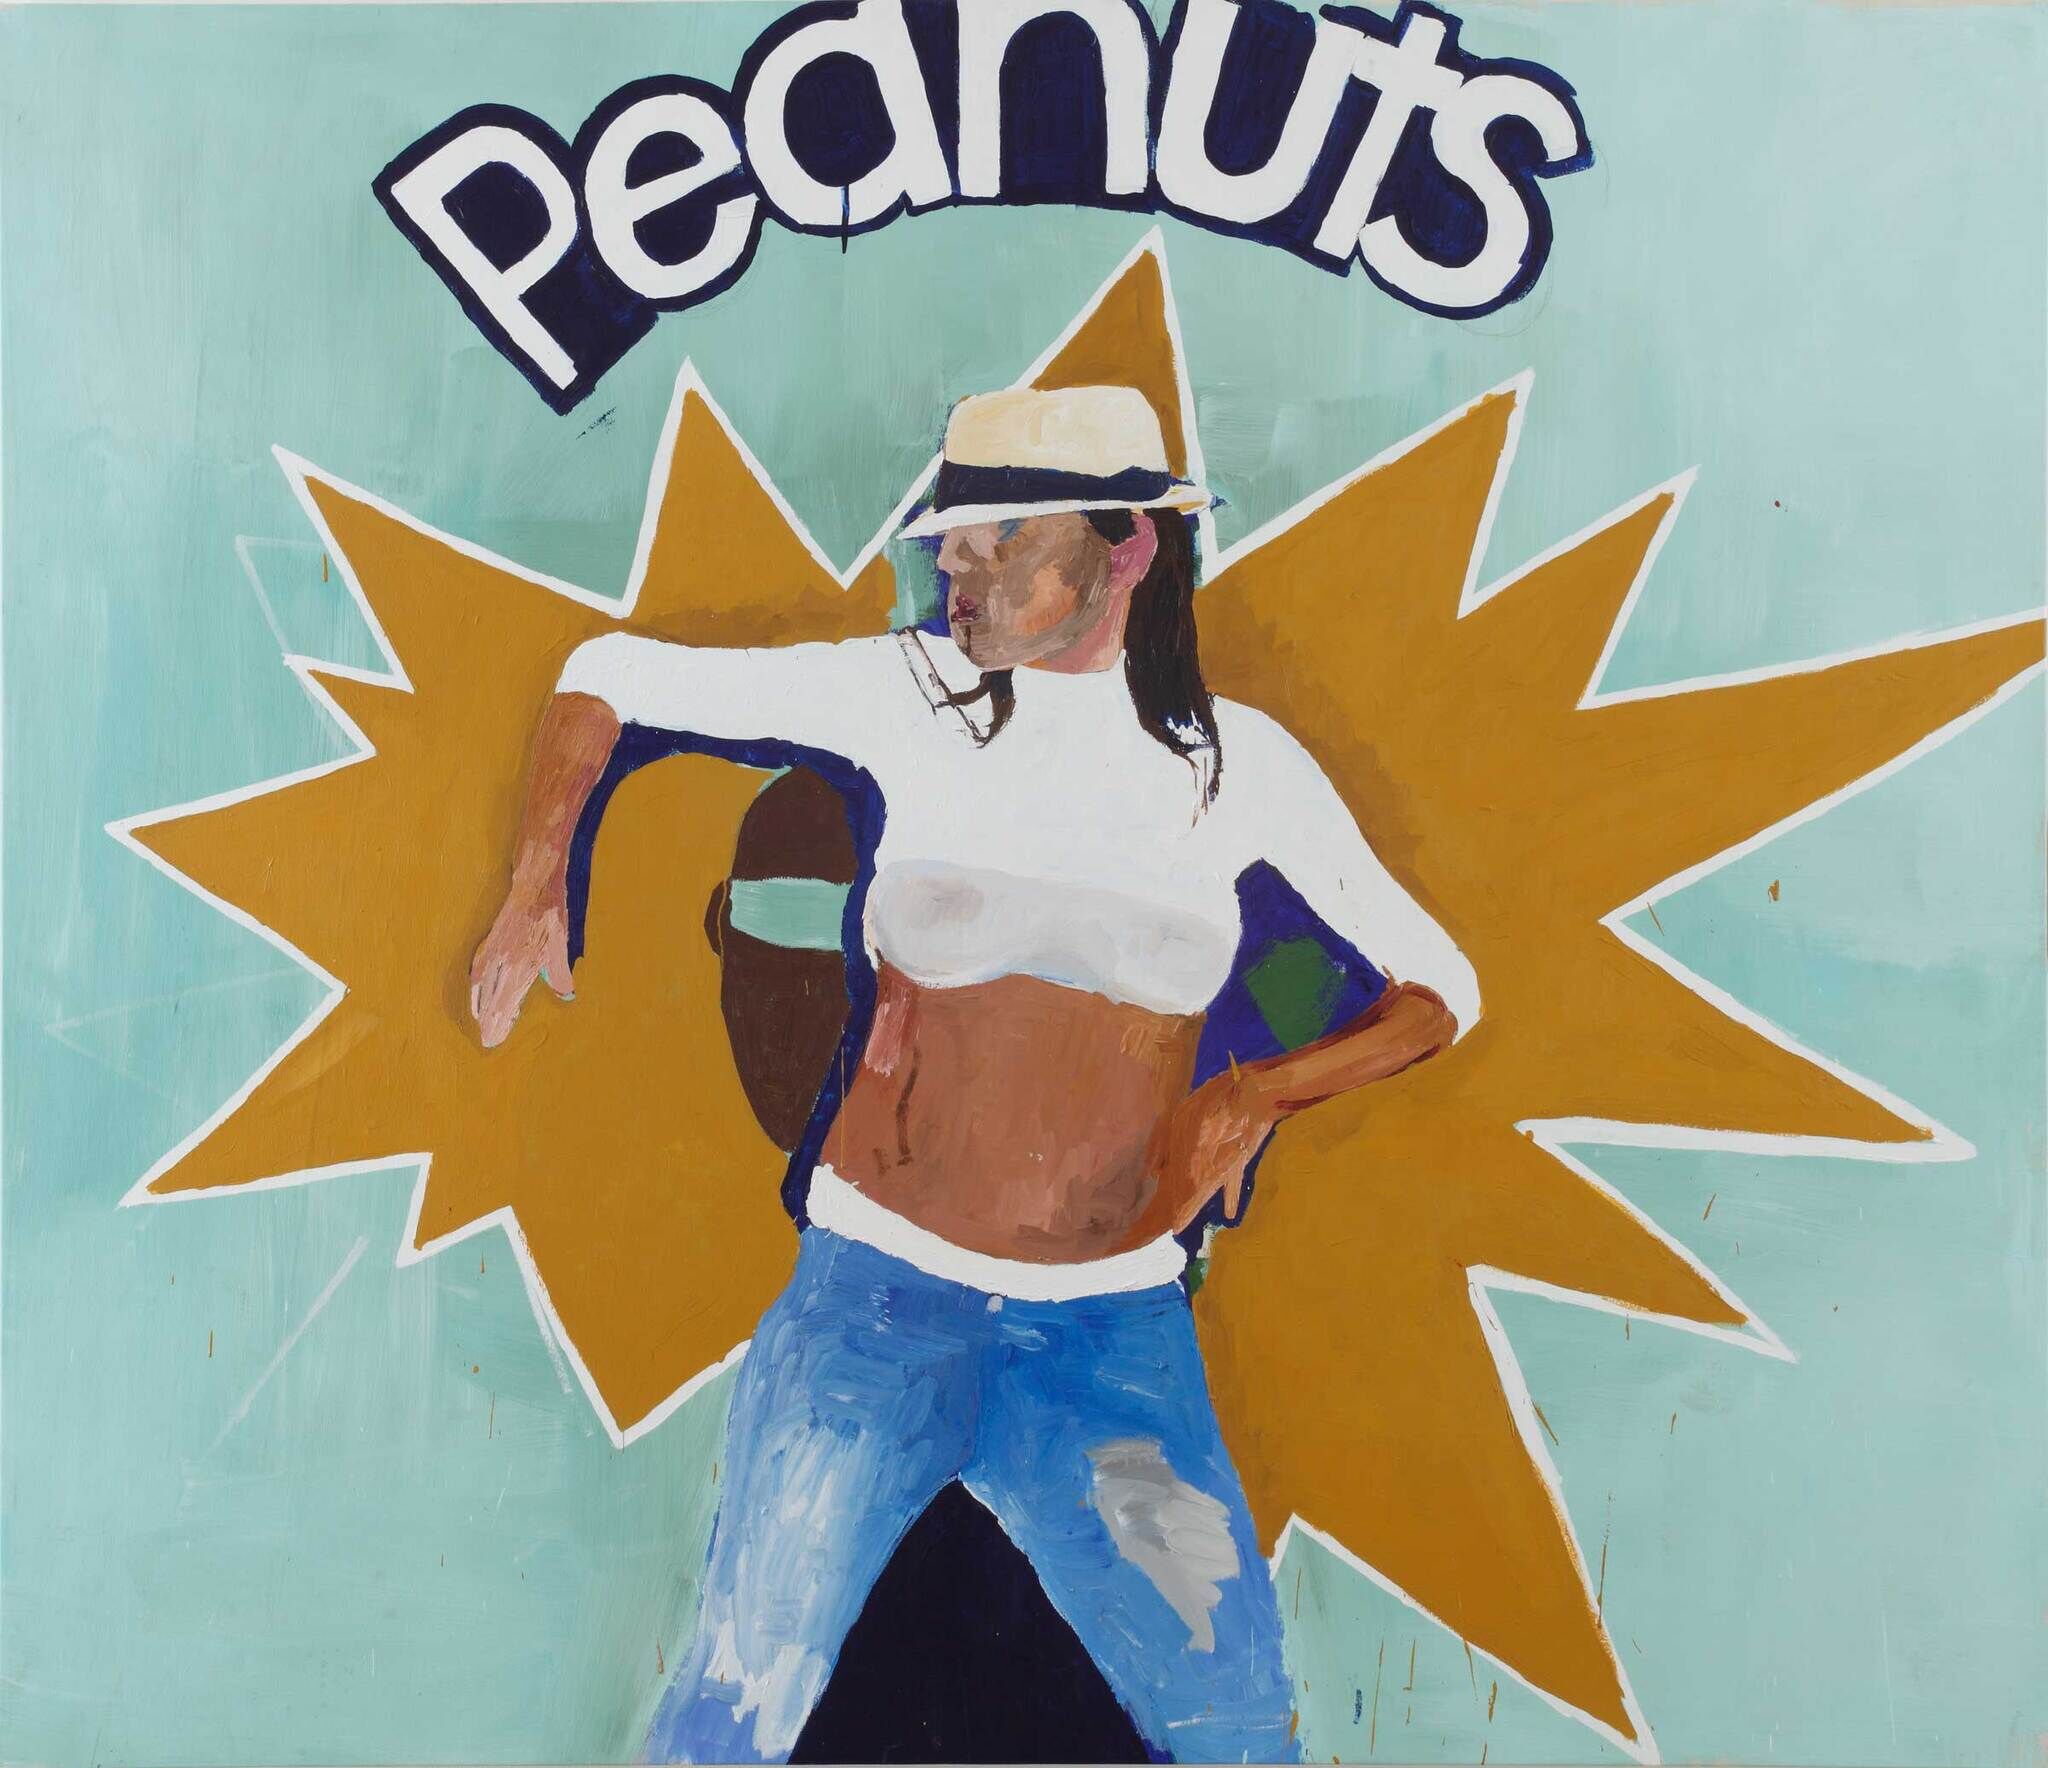 A central figure stands with their arms bent and their head turned to the left, as if mid-dance. Behind them is an irregularly shaped yellow star with a white outline. The background is pale blue, and in the top center, the word "Peanuts" is written in white text with a navy outline.